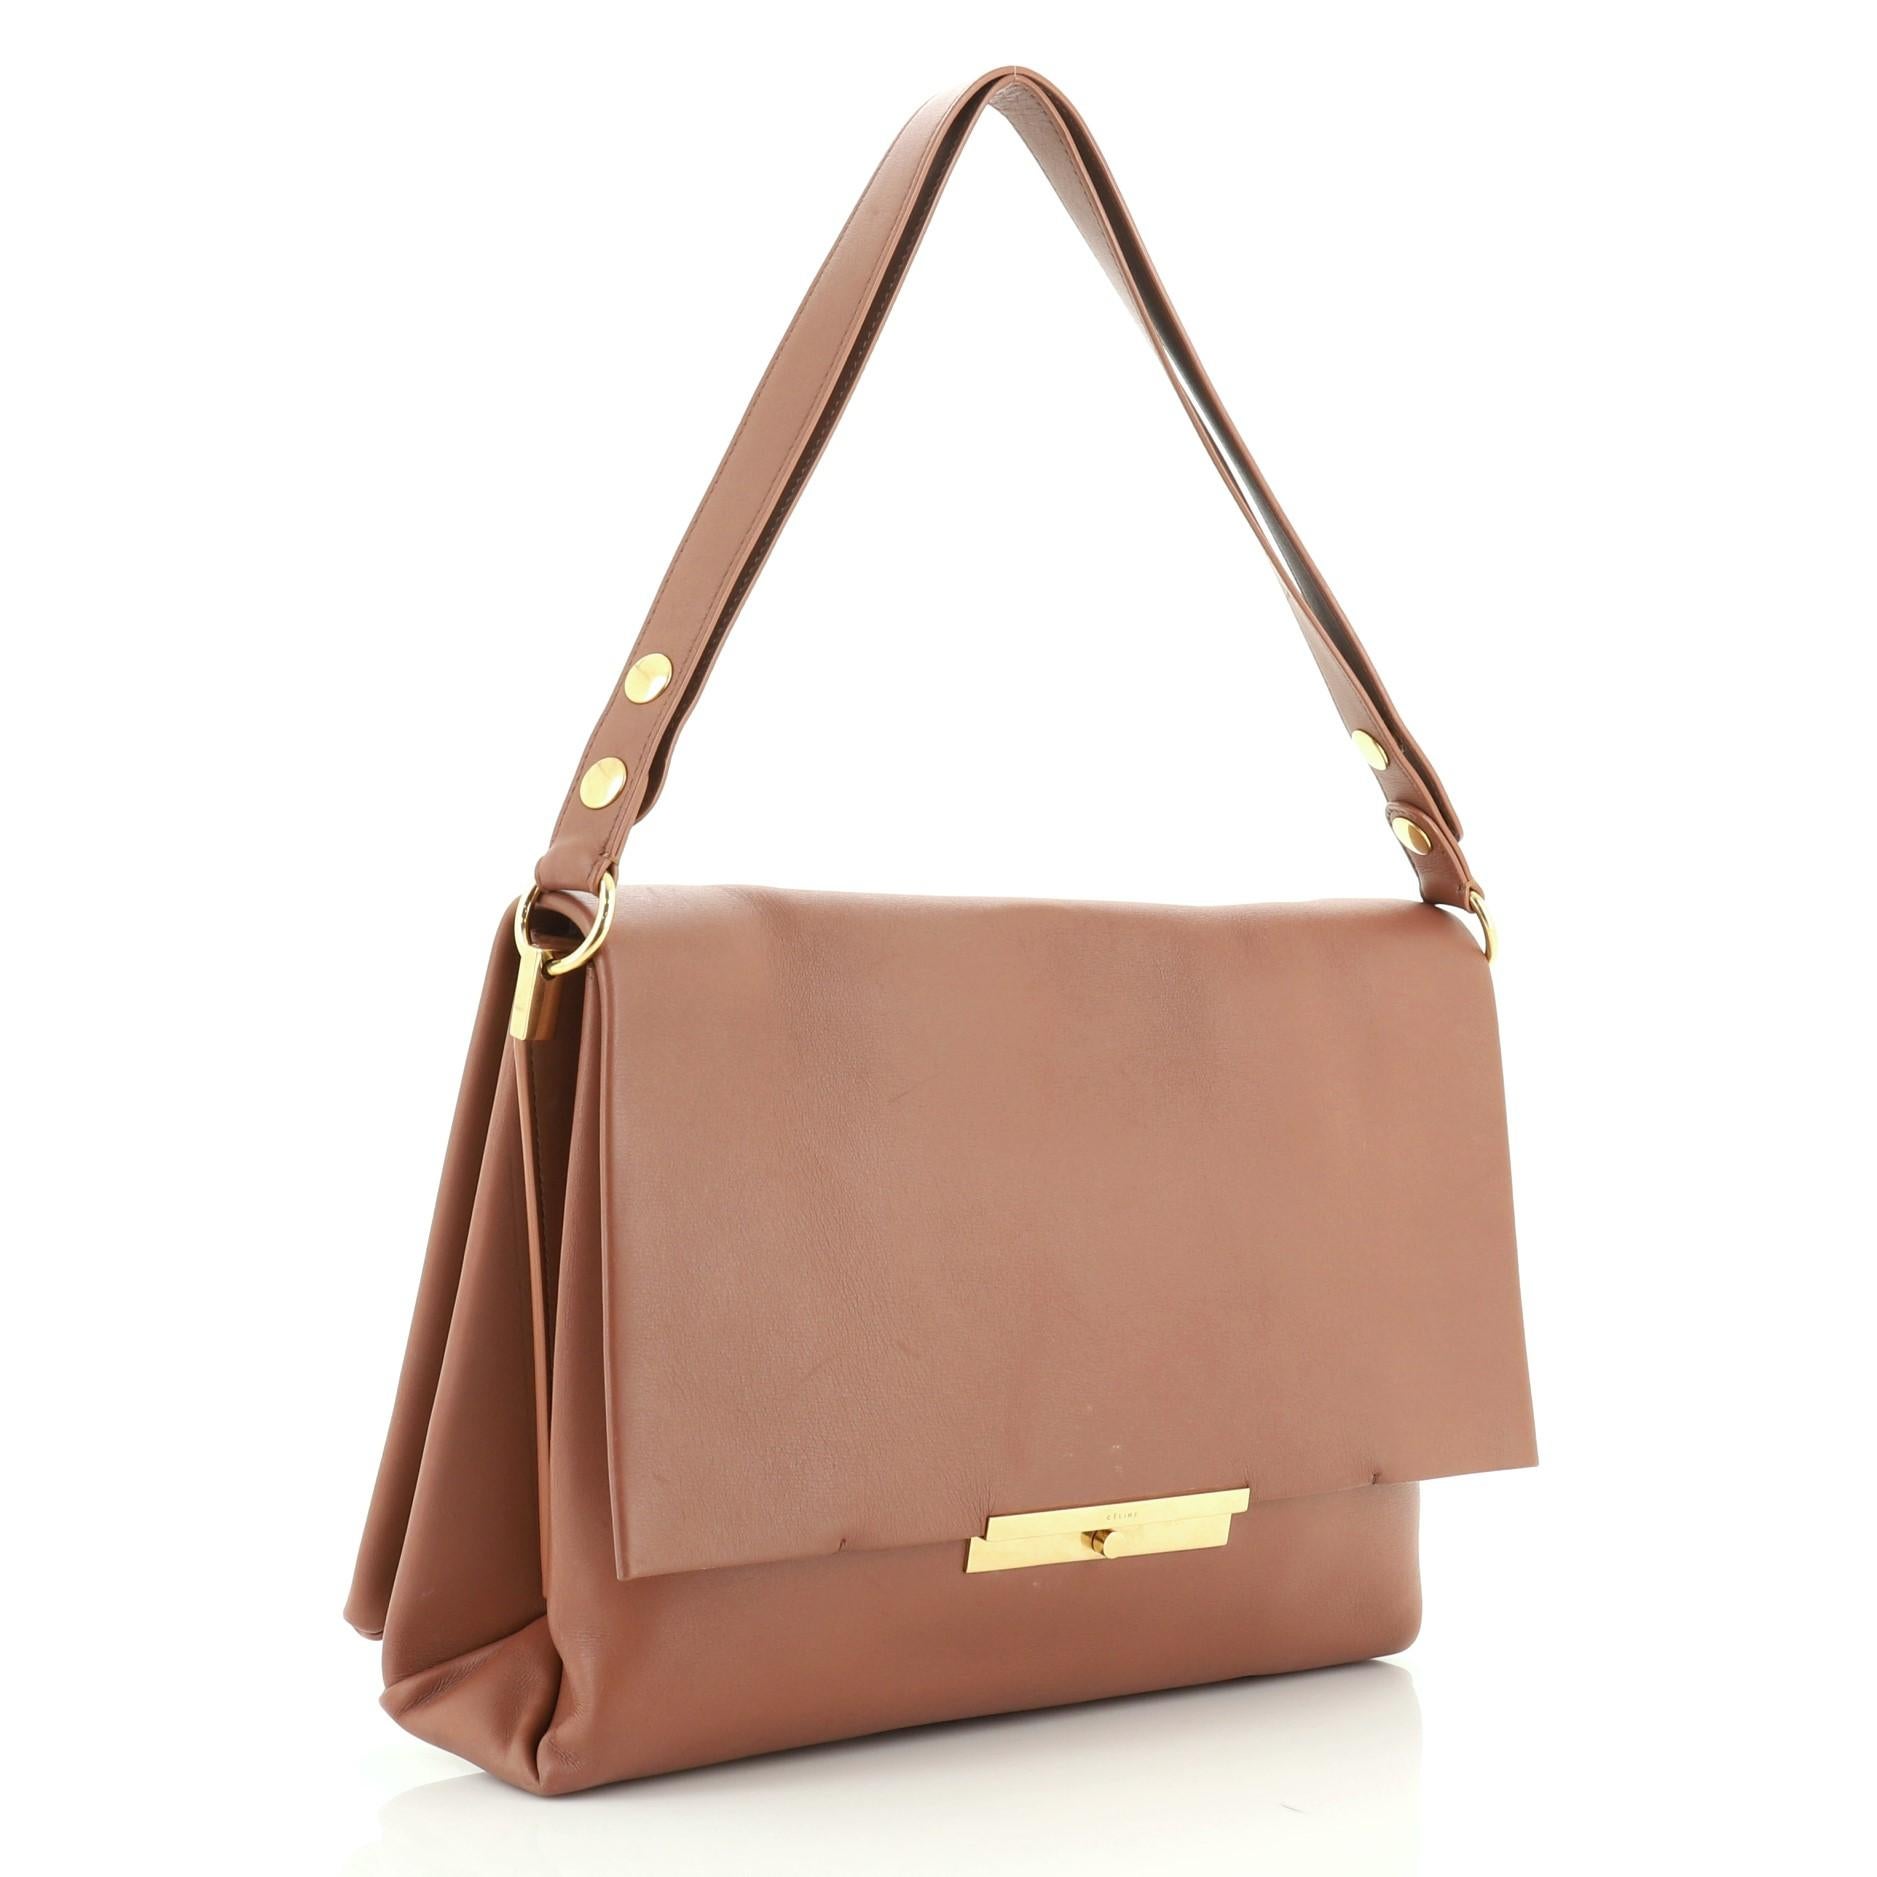 This Celine Blade Shoulder Bag Leather, crafted from brown leather, features a flat leather strap and gold-tone hardware. Its flap opens to a neutral suede interior with slip pockets. 

Estimated Retail Price: $3,100
Condition: Great. Minor wear and